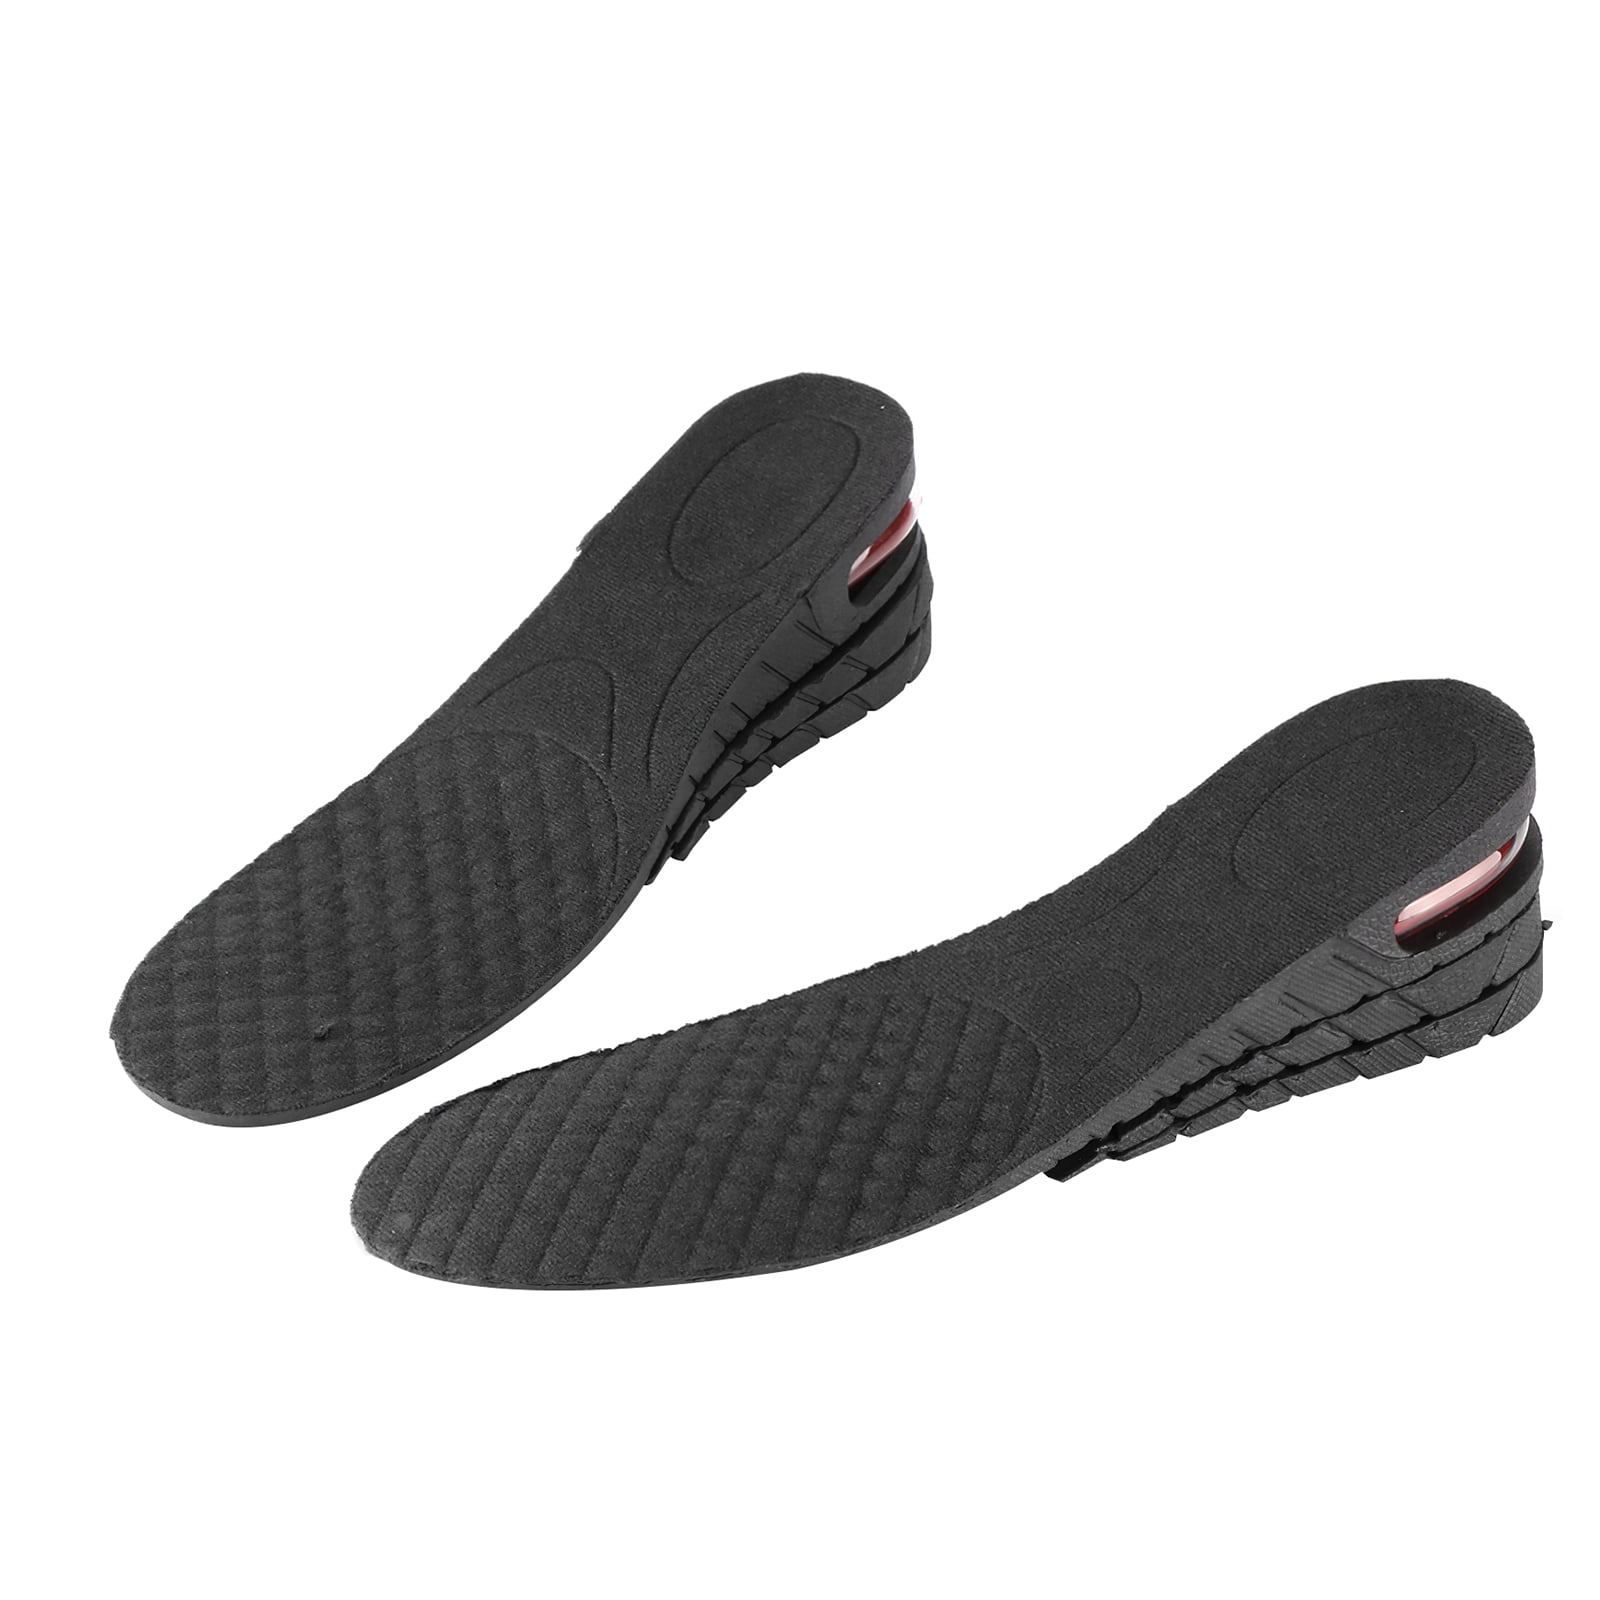 Men's Size 6.5-9 2" Height Increase Insole Shoe Lifts For Men 2-Layer 